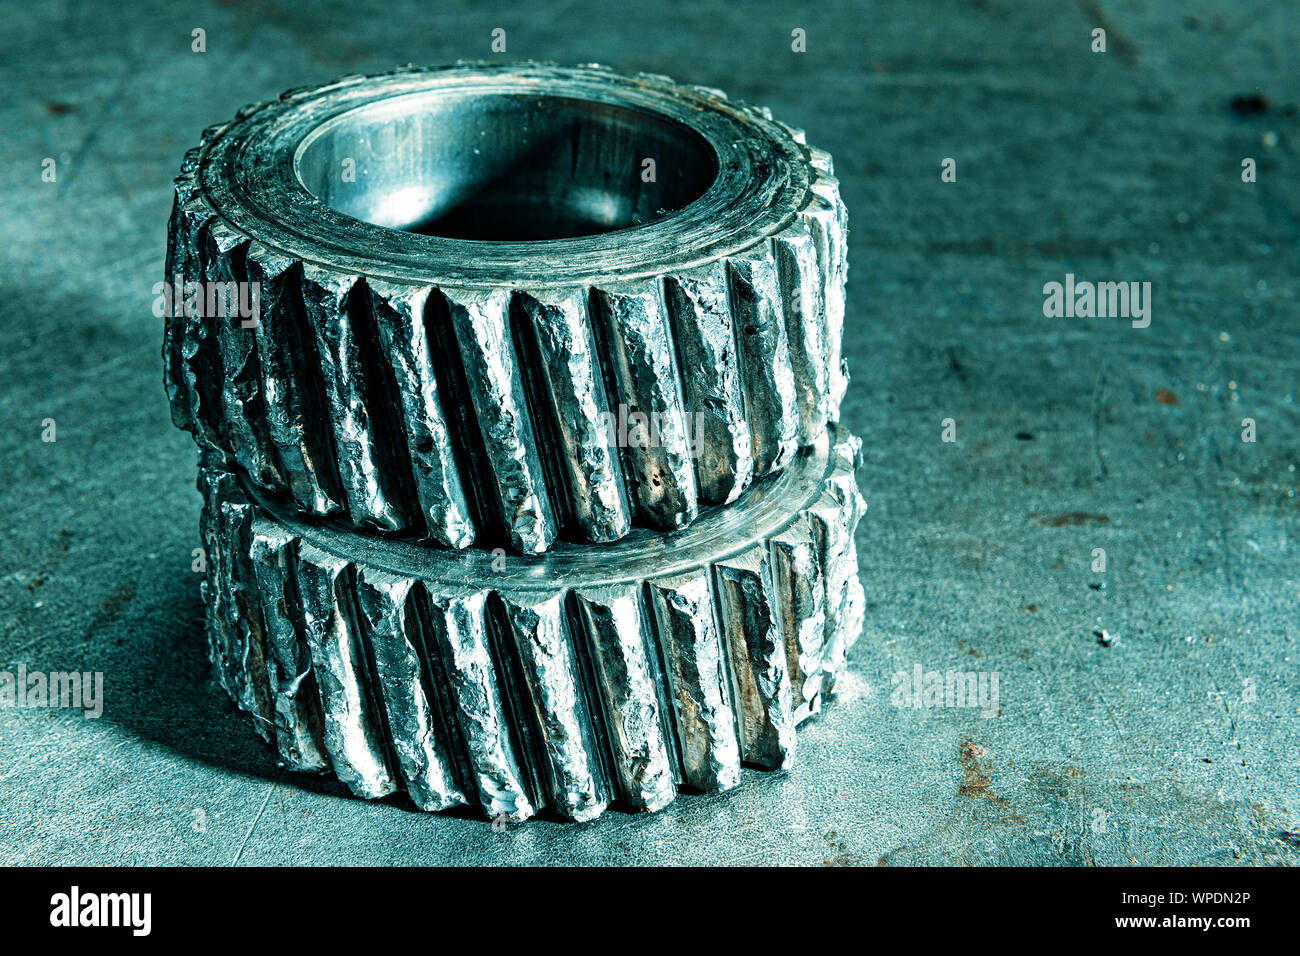 Two very worn out gears on a metal plate in cool petrol tone. Stock Photo